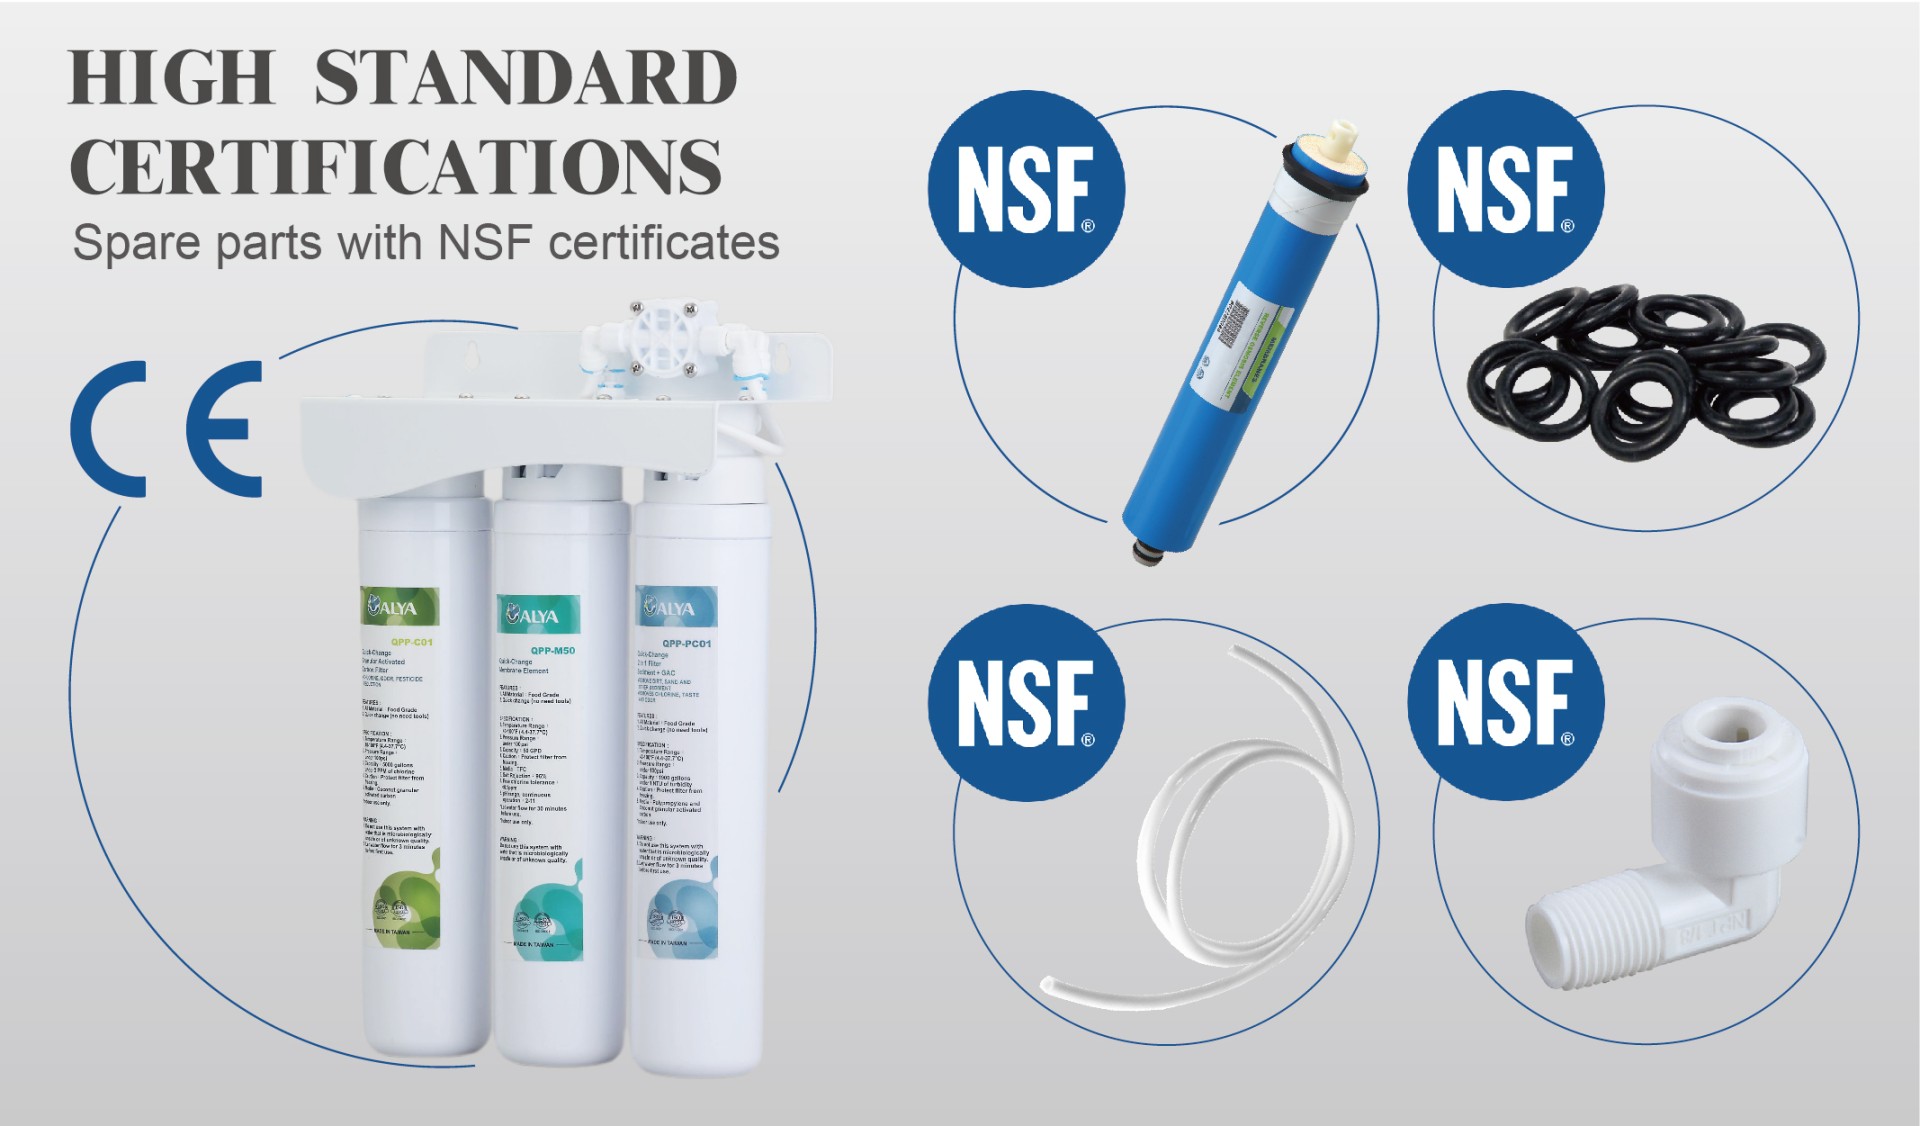 Spare parts with NSF certificates